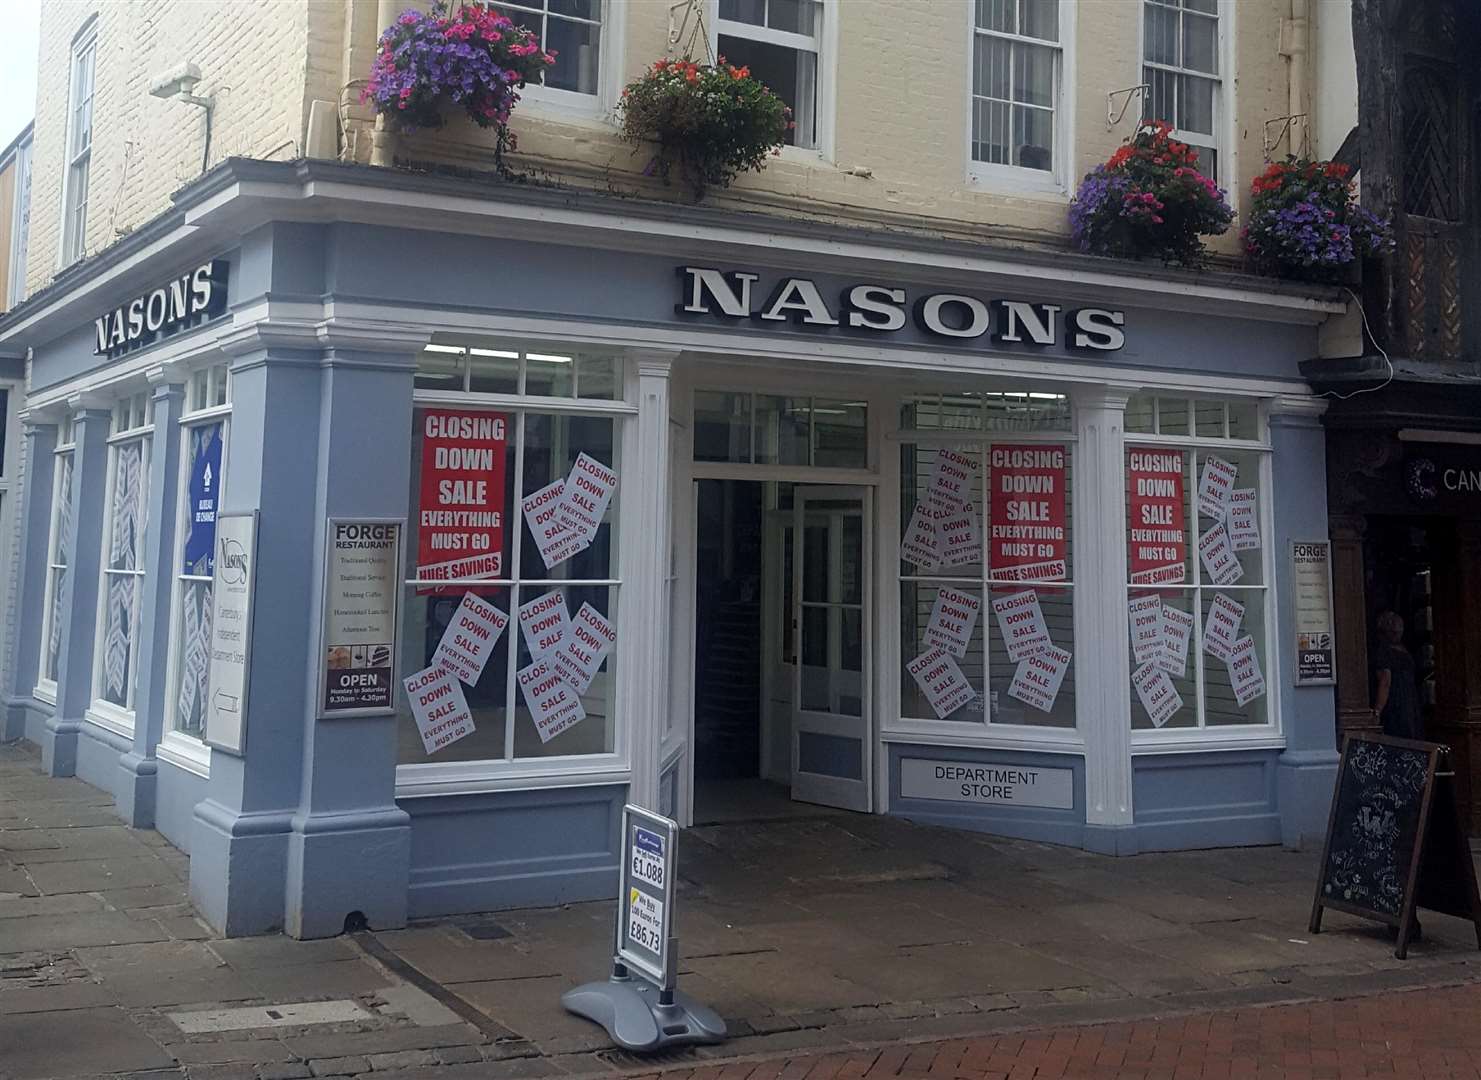 Nasons in Canterbury High Street which is closing